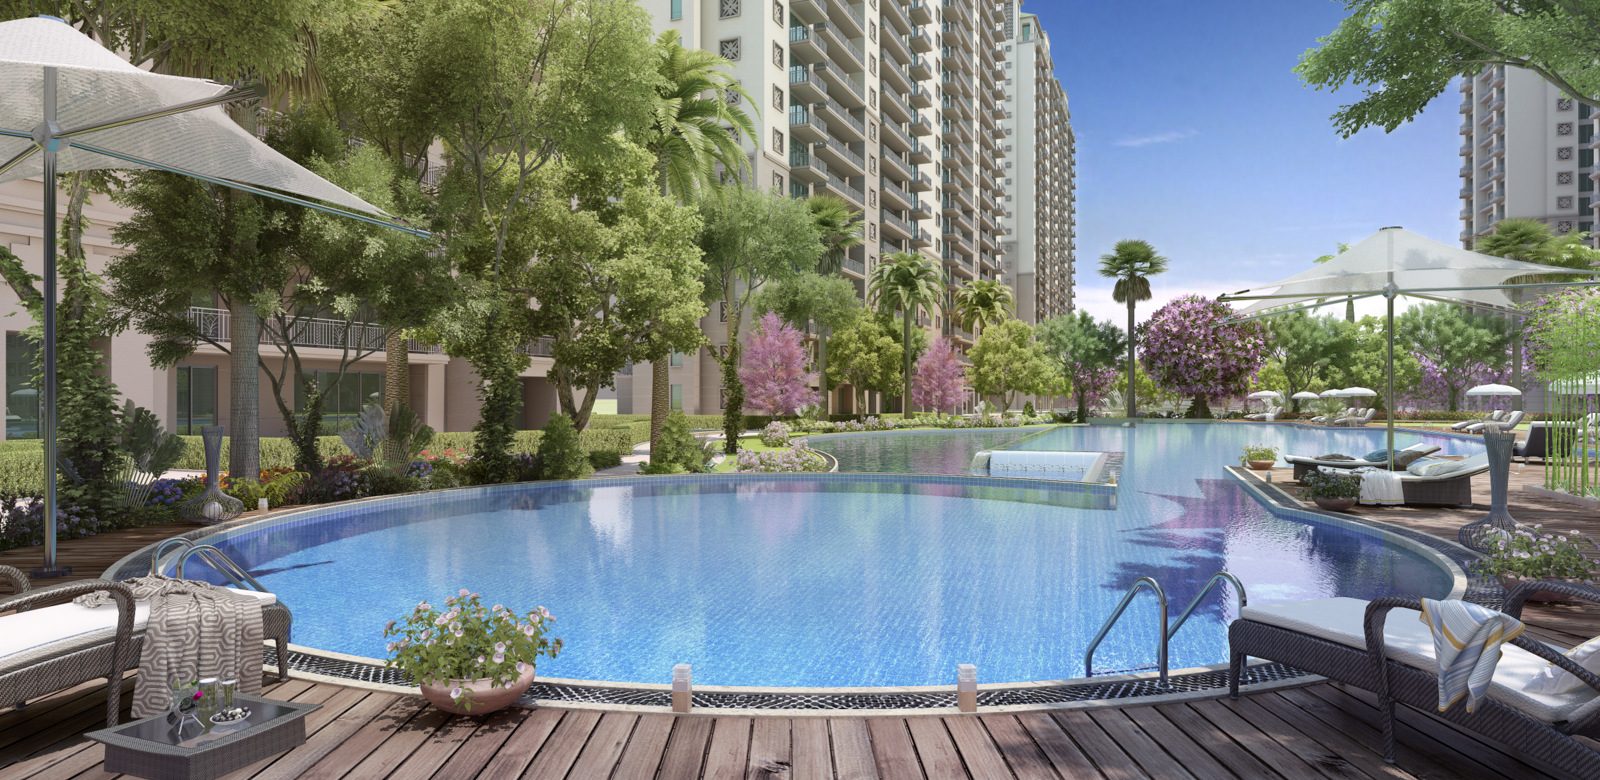 3 BHK Flats for Sale in ATS Le Grandiose, Sector-150, Noida